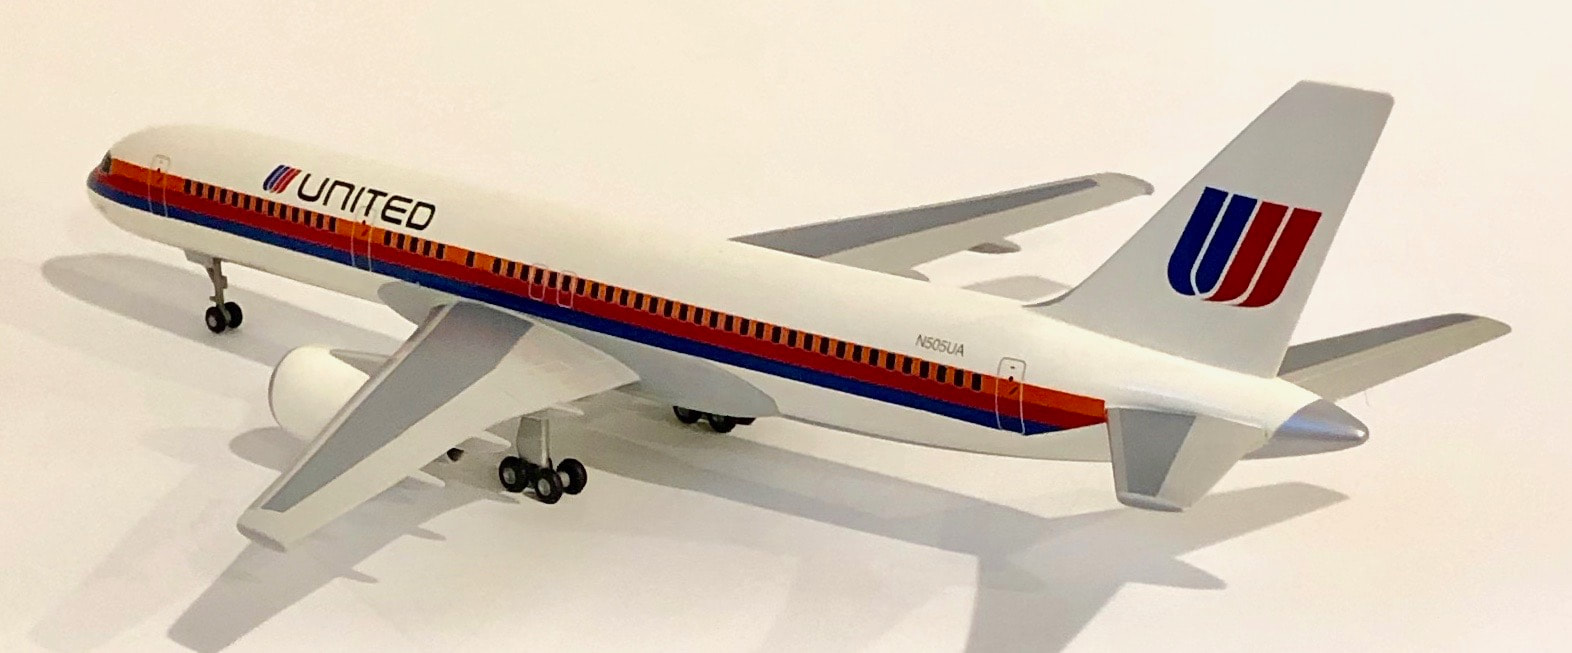 United Saul Bass Boeing 727-200 decals for Minicraft 1/144 kit 